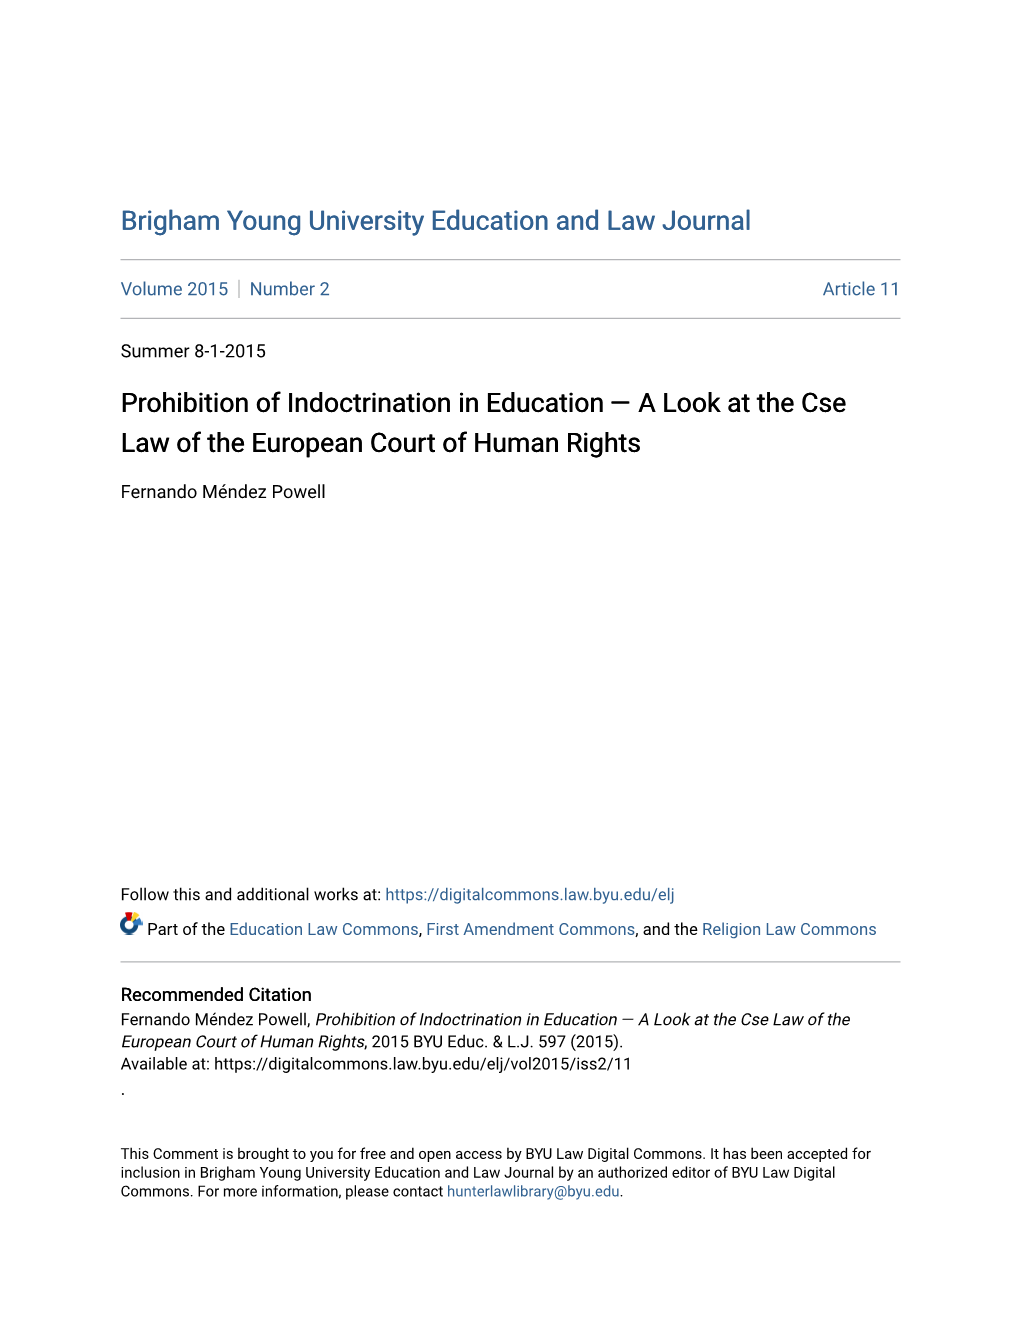 Prohibition of Indoctrination in Education Â•Fl a Look at the Cse Law of the European Court of Human Rights